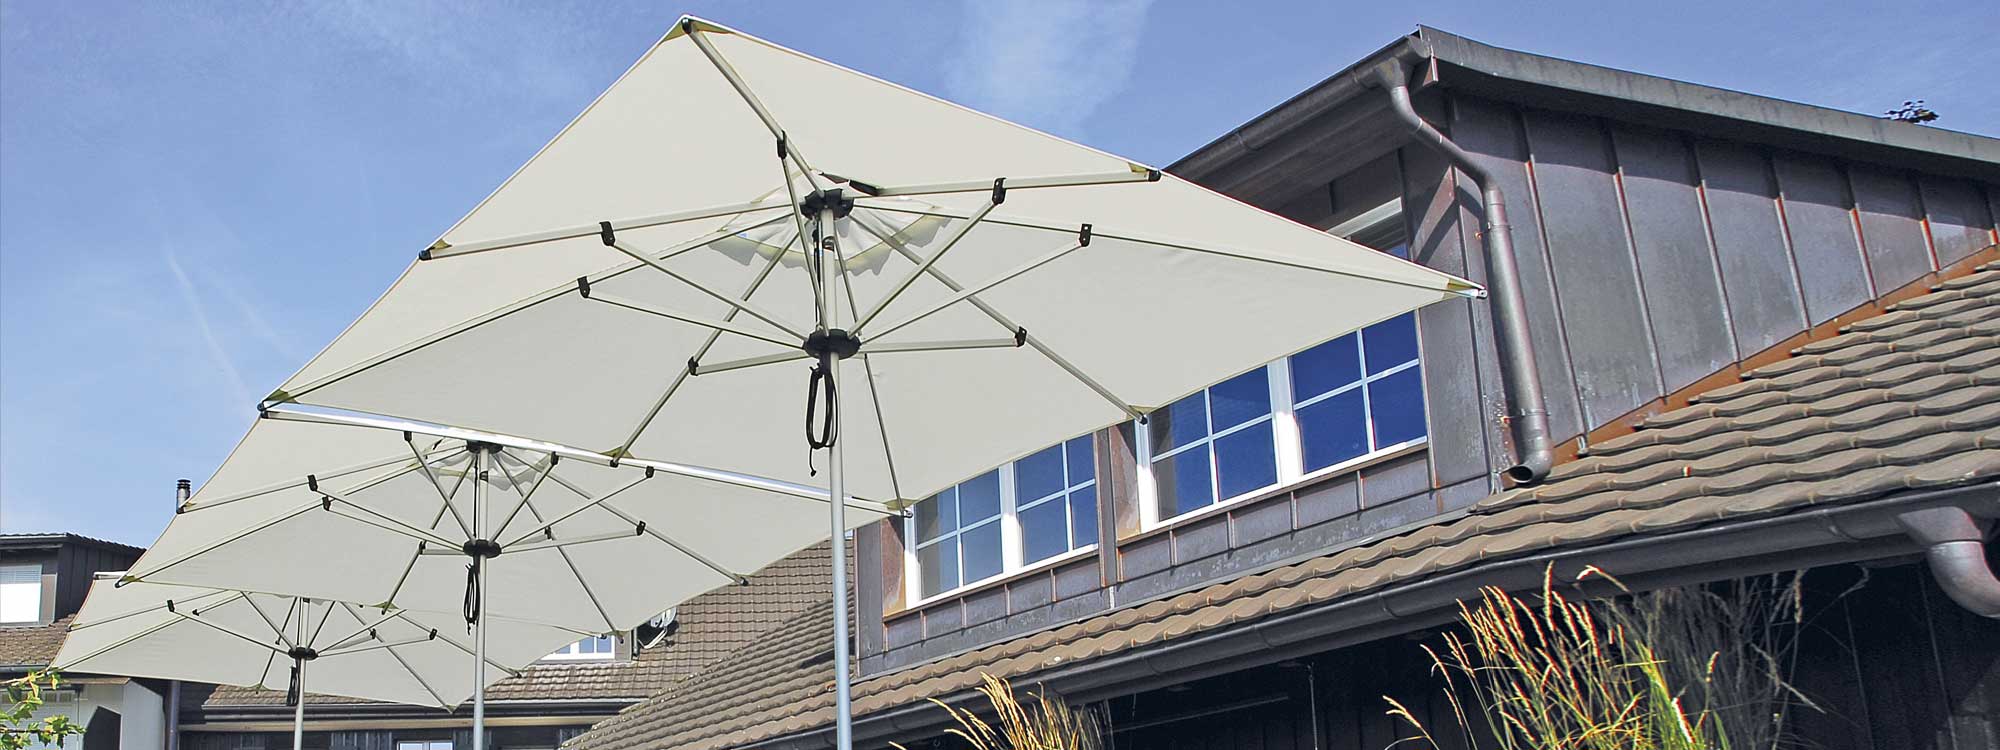 Libra mast parasol is an easy-to-use aluminium parasol in high quality parasol materials by Shademaker garden parasols company, Germany.